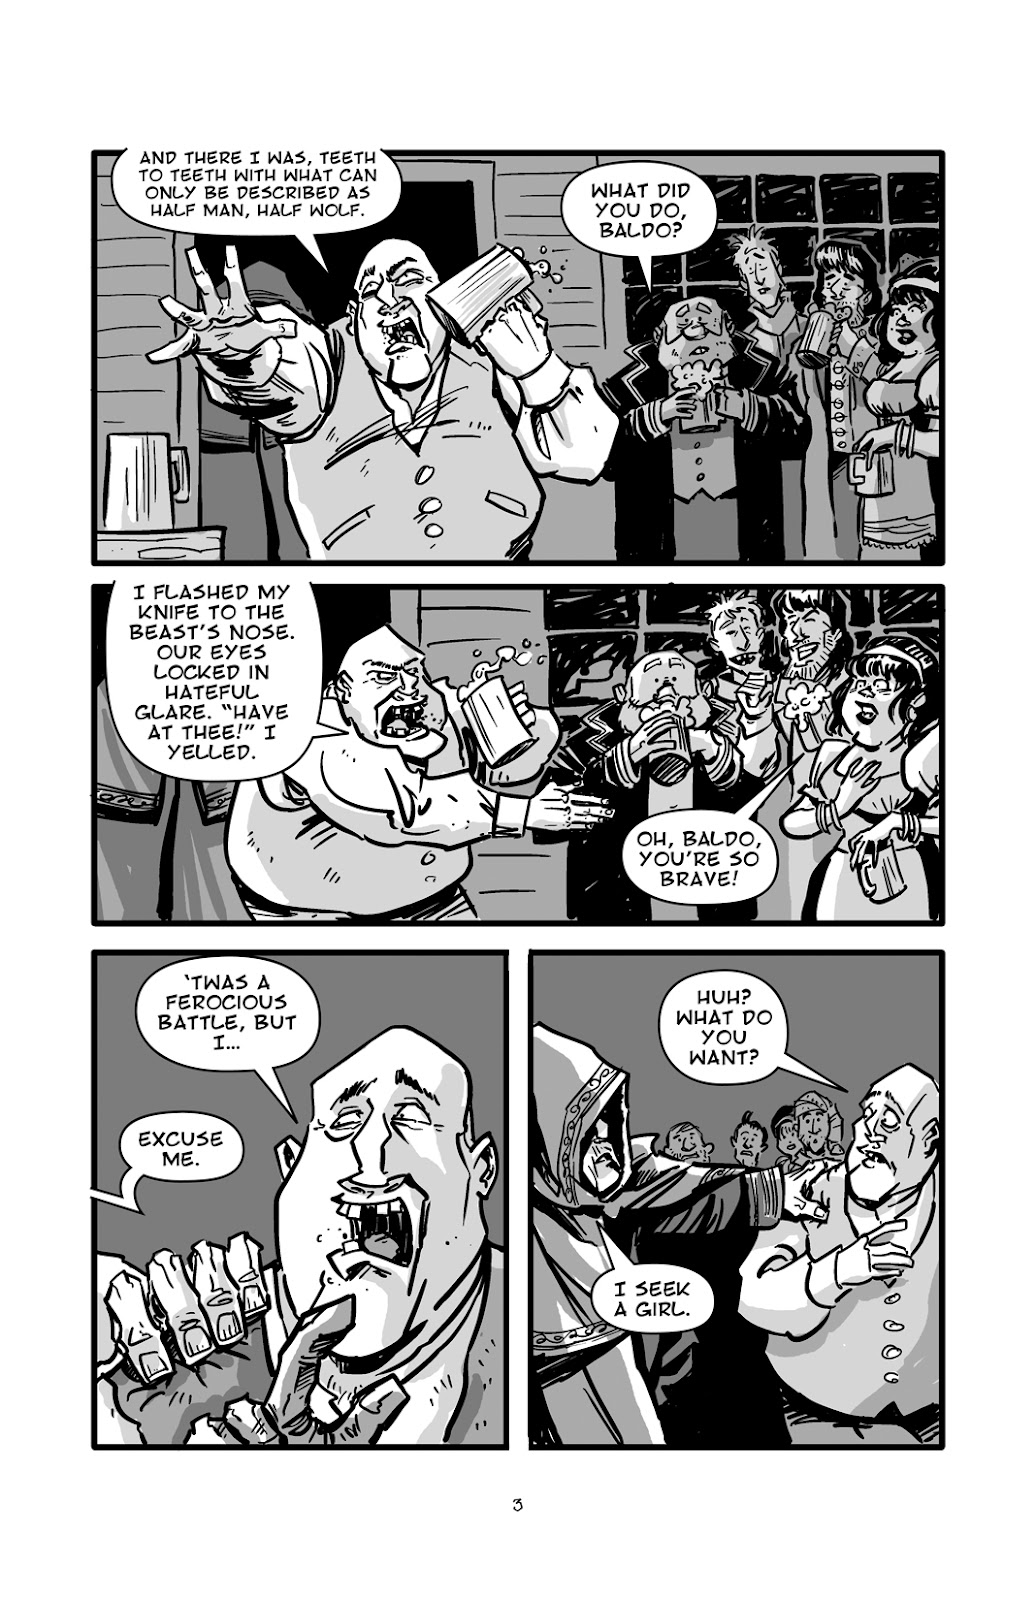 Pinocchio: Vampire Slayer - Of Wood and Blood issue 1 - Page 4